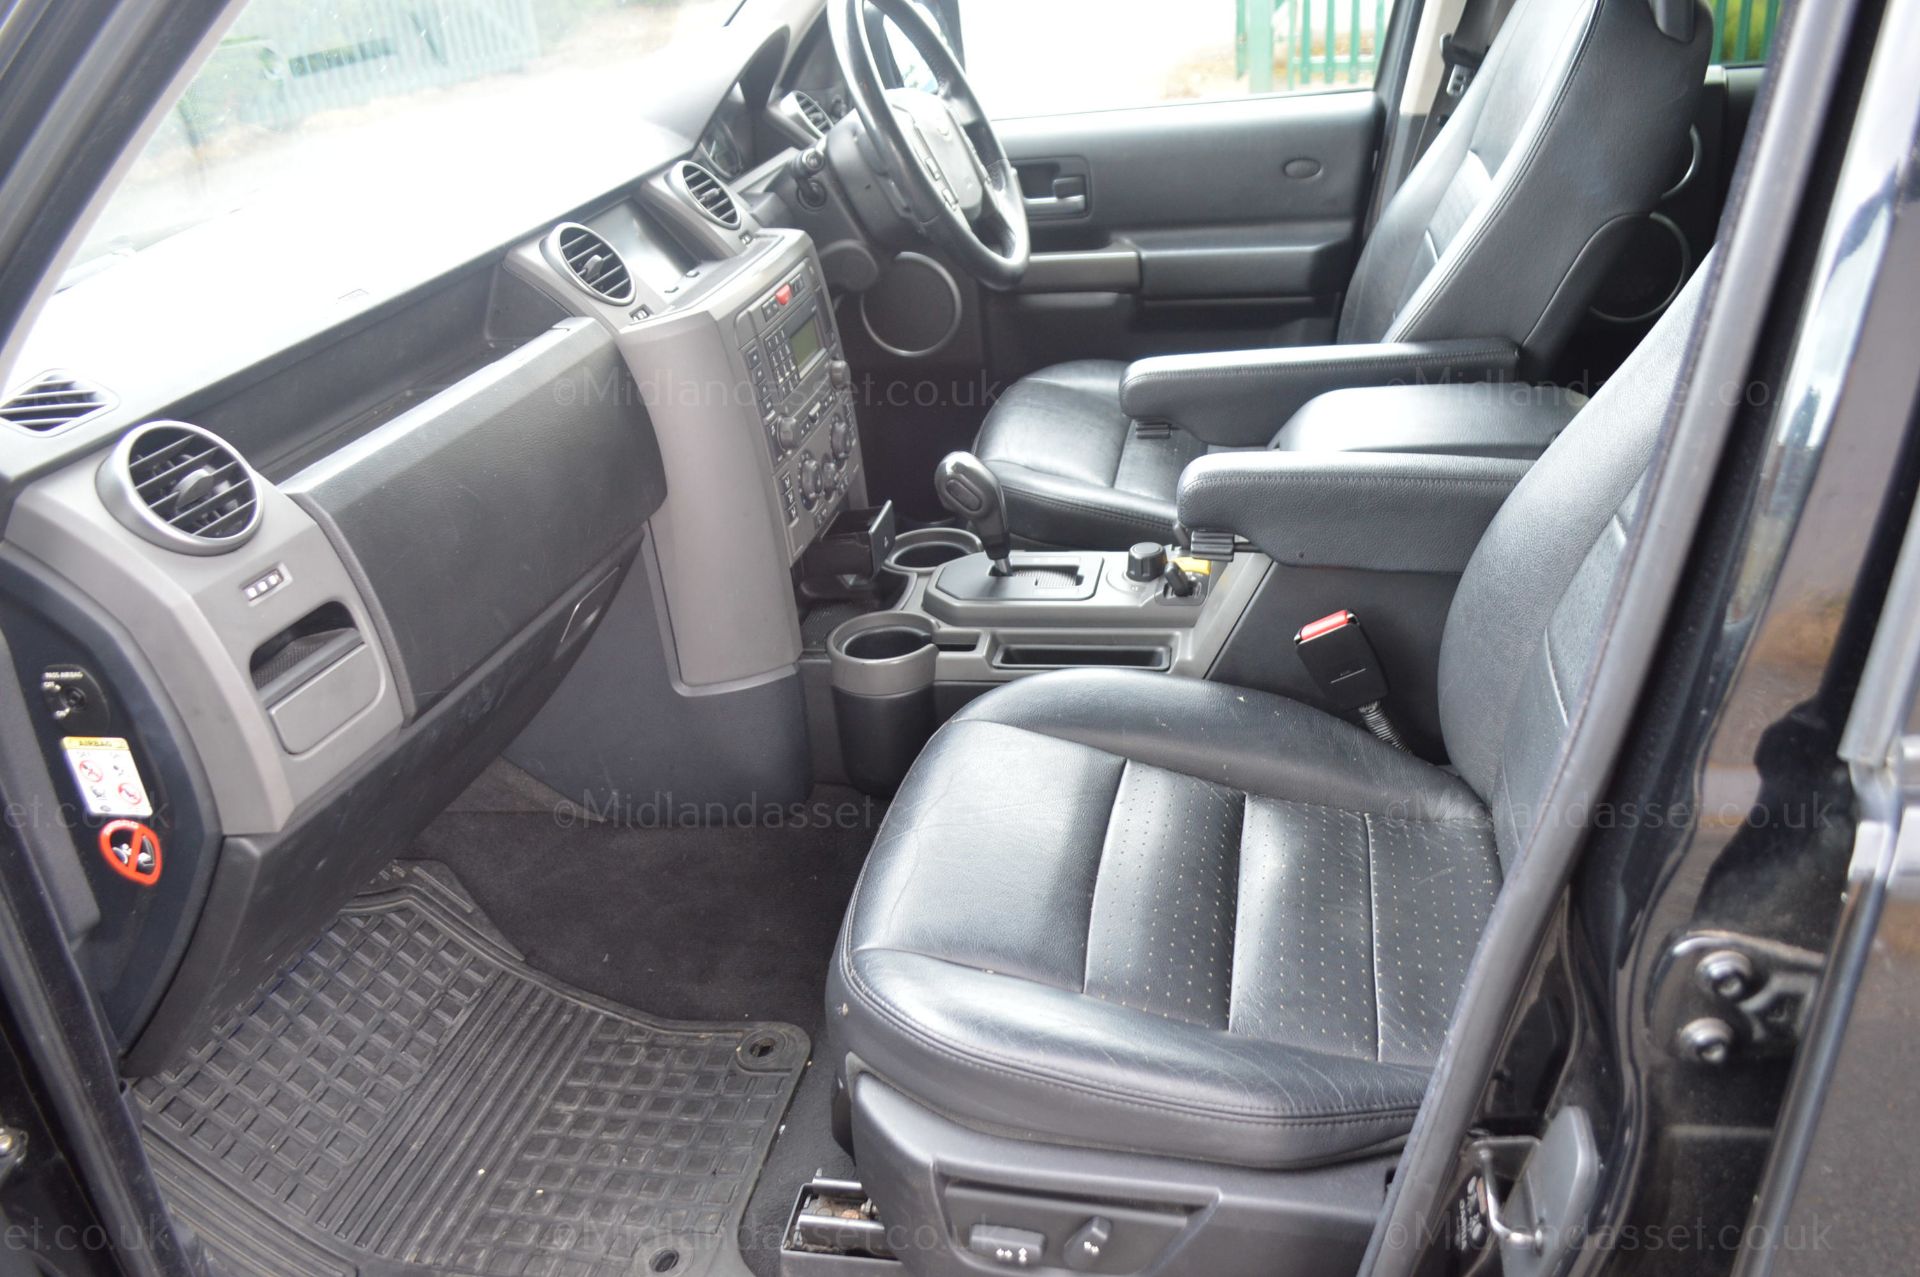 2006/56 REG LAND ROVER DISCOVERY 3 TDV6 HSE AUTO 7 SEAT SERVICE HISTORY - Image 12 of 15